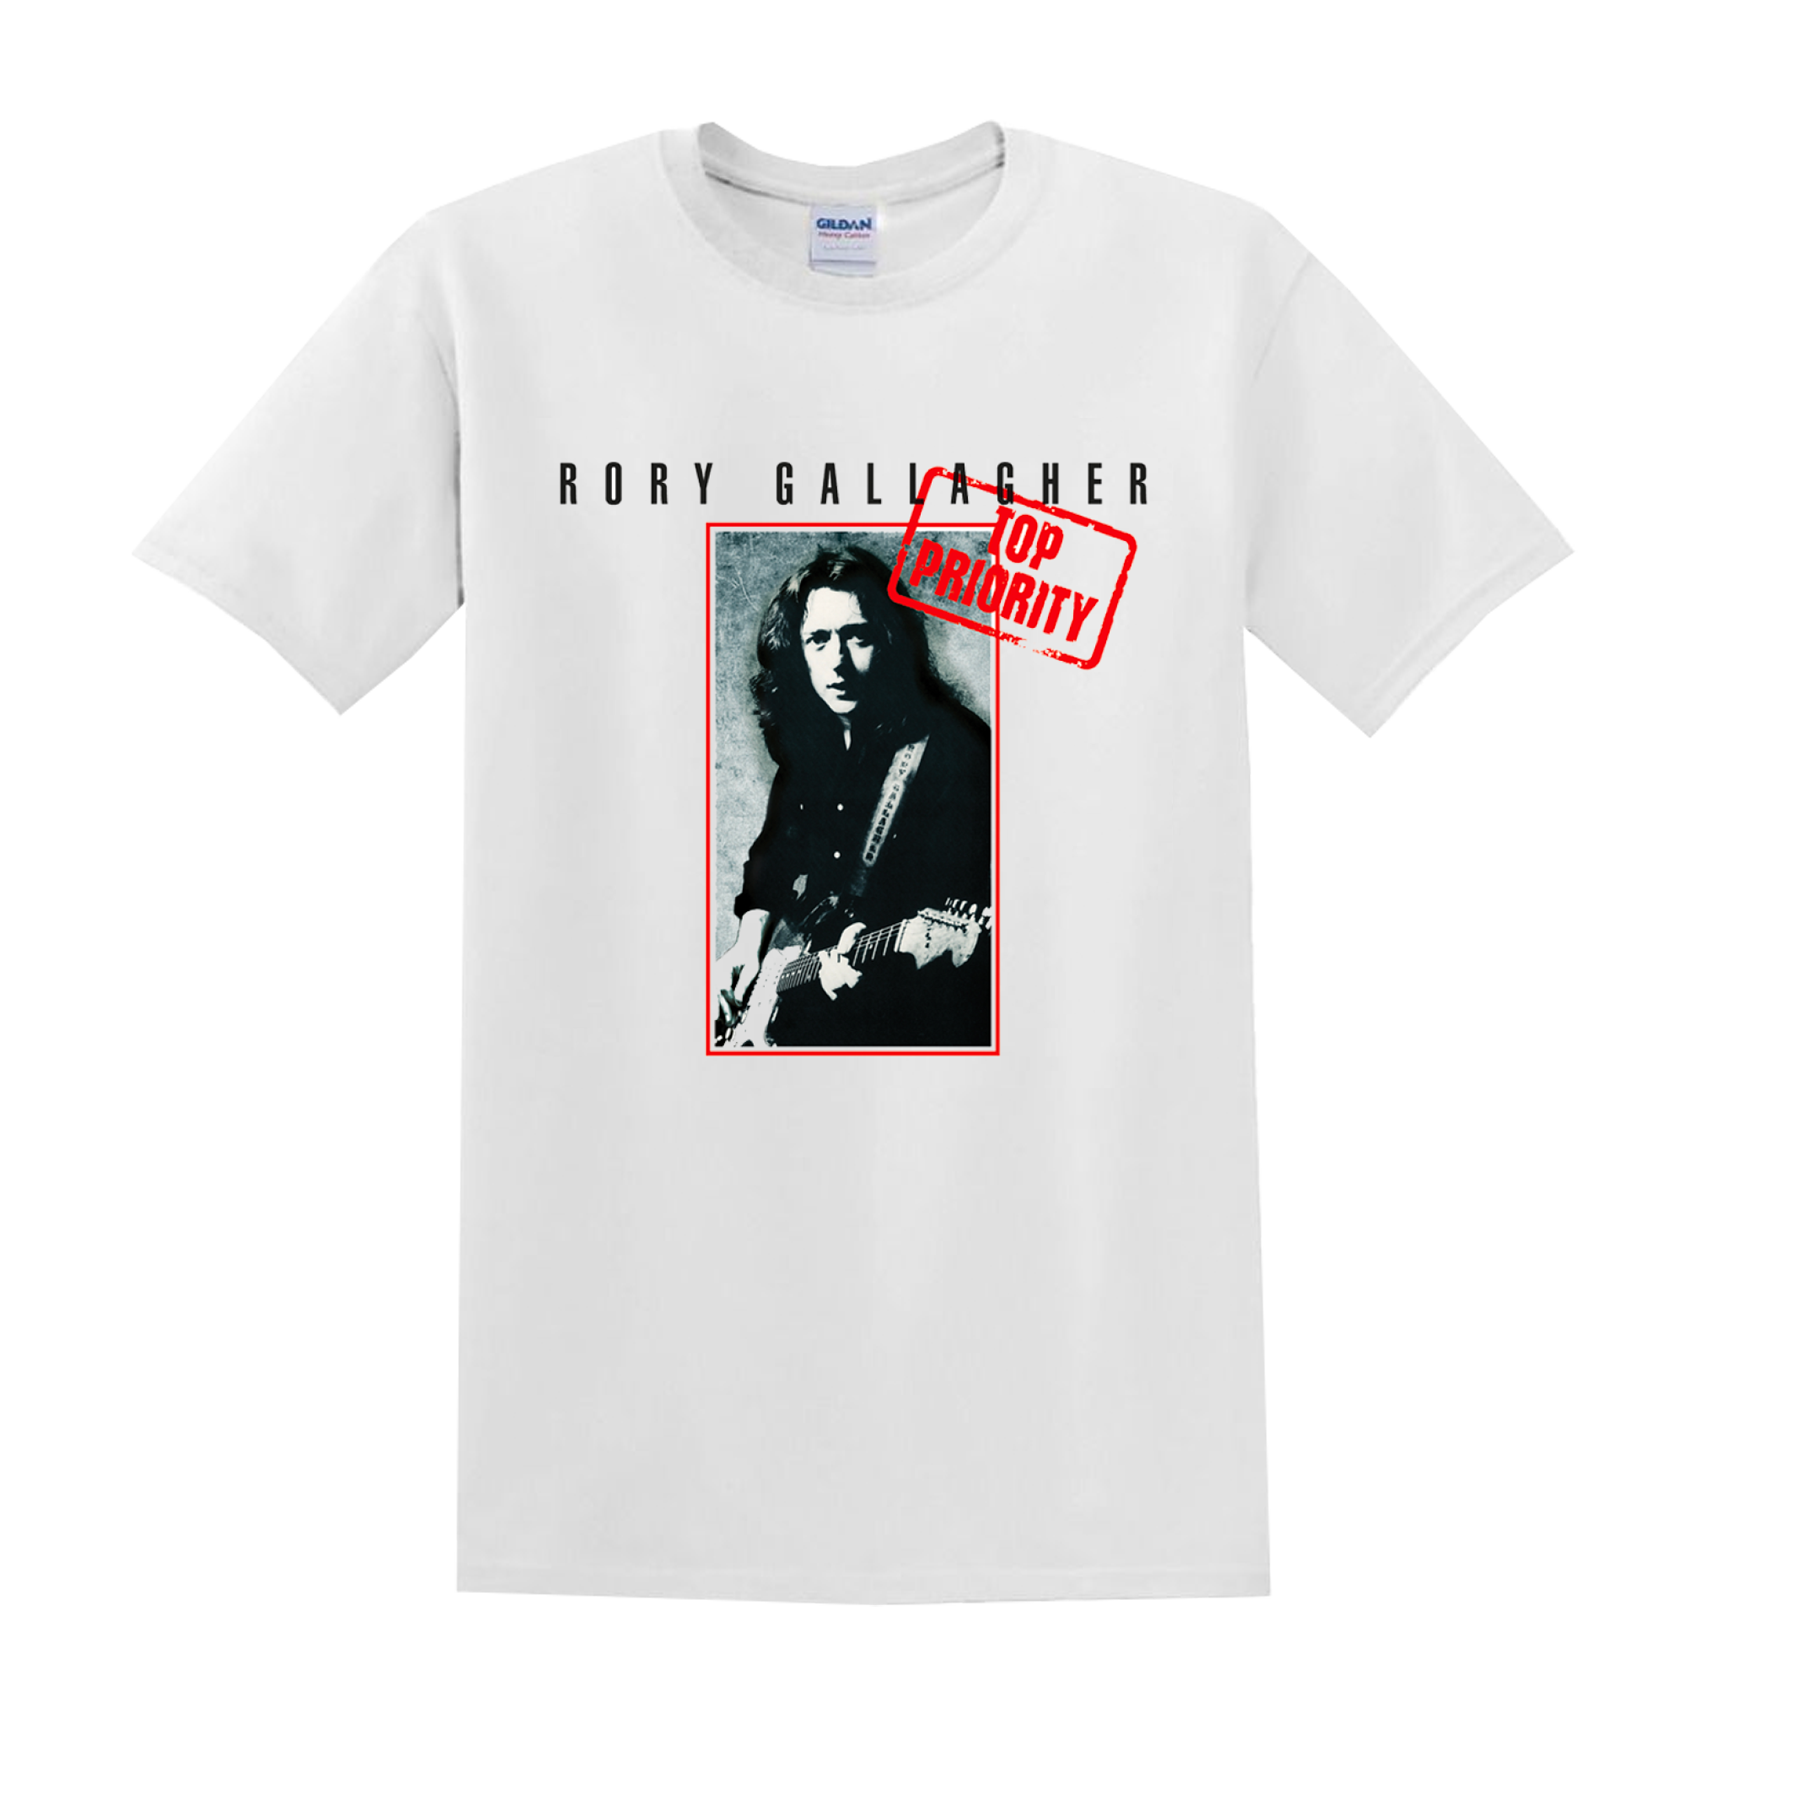 Rory Gallagher - Rory Gallagher - Official Top Priority album (1979) T-shirt